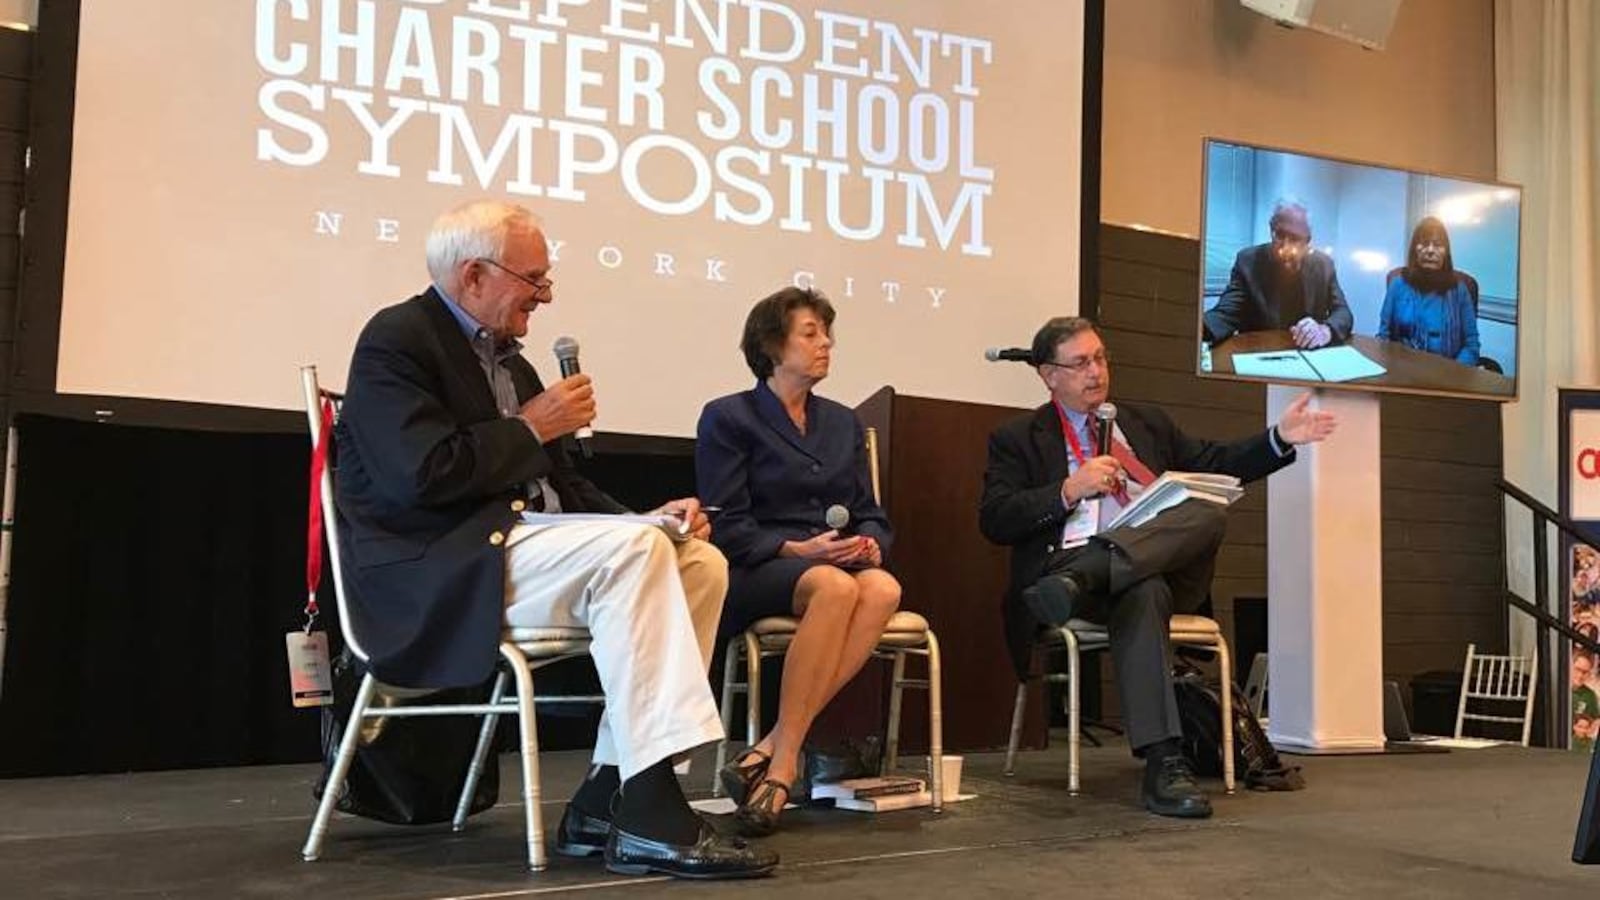 Veter education journalist John Merrow moderates a panel at the Independent Charter School Symposium.